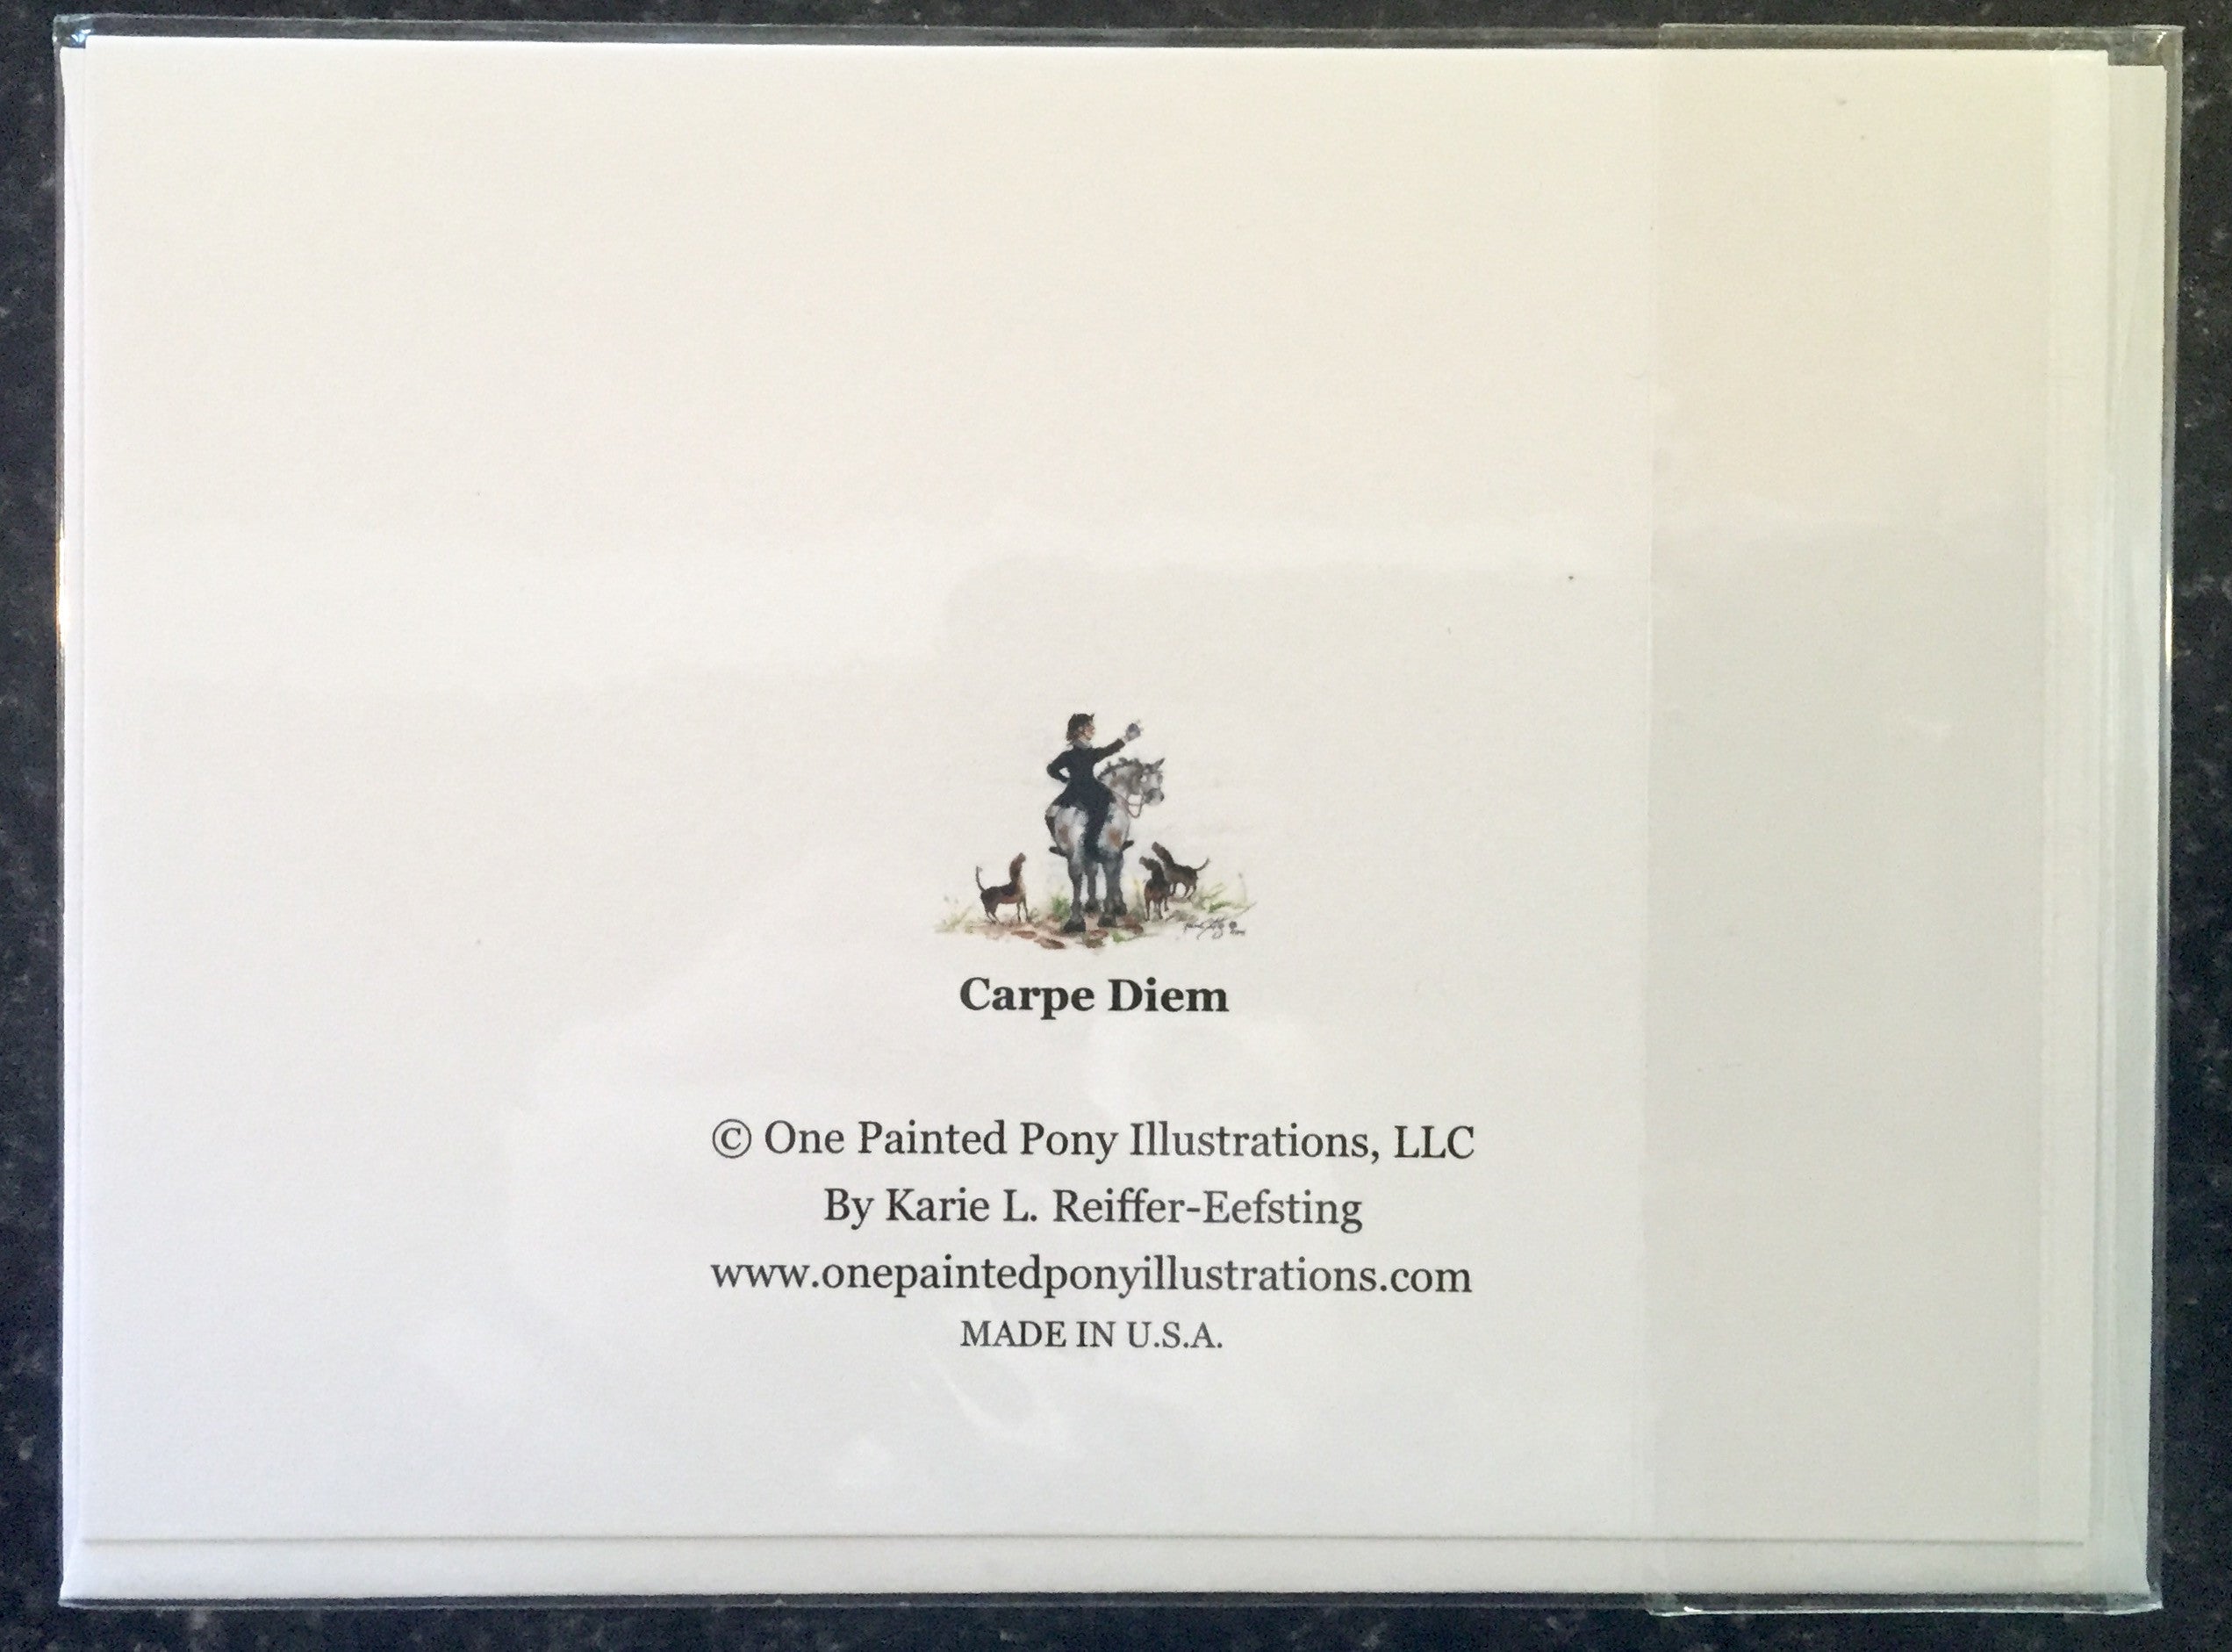 One Painted Pony Illustrations Gift Card "Carpe Diem" - Horse & Hound Tack Shop & Pet Supply